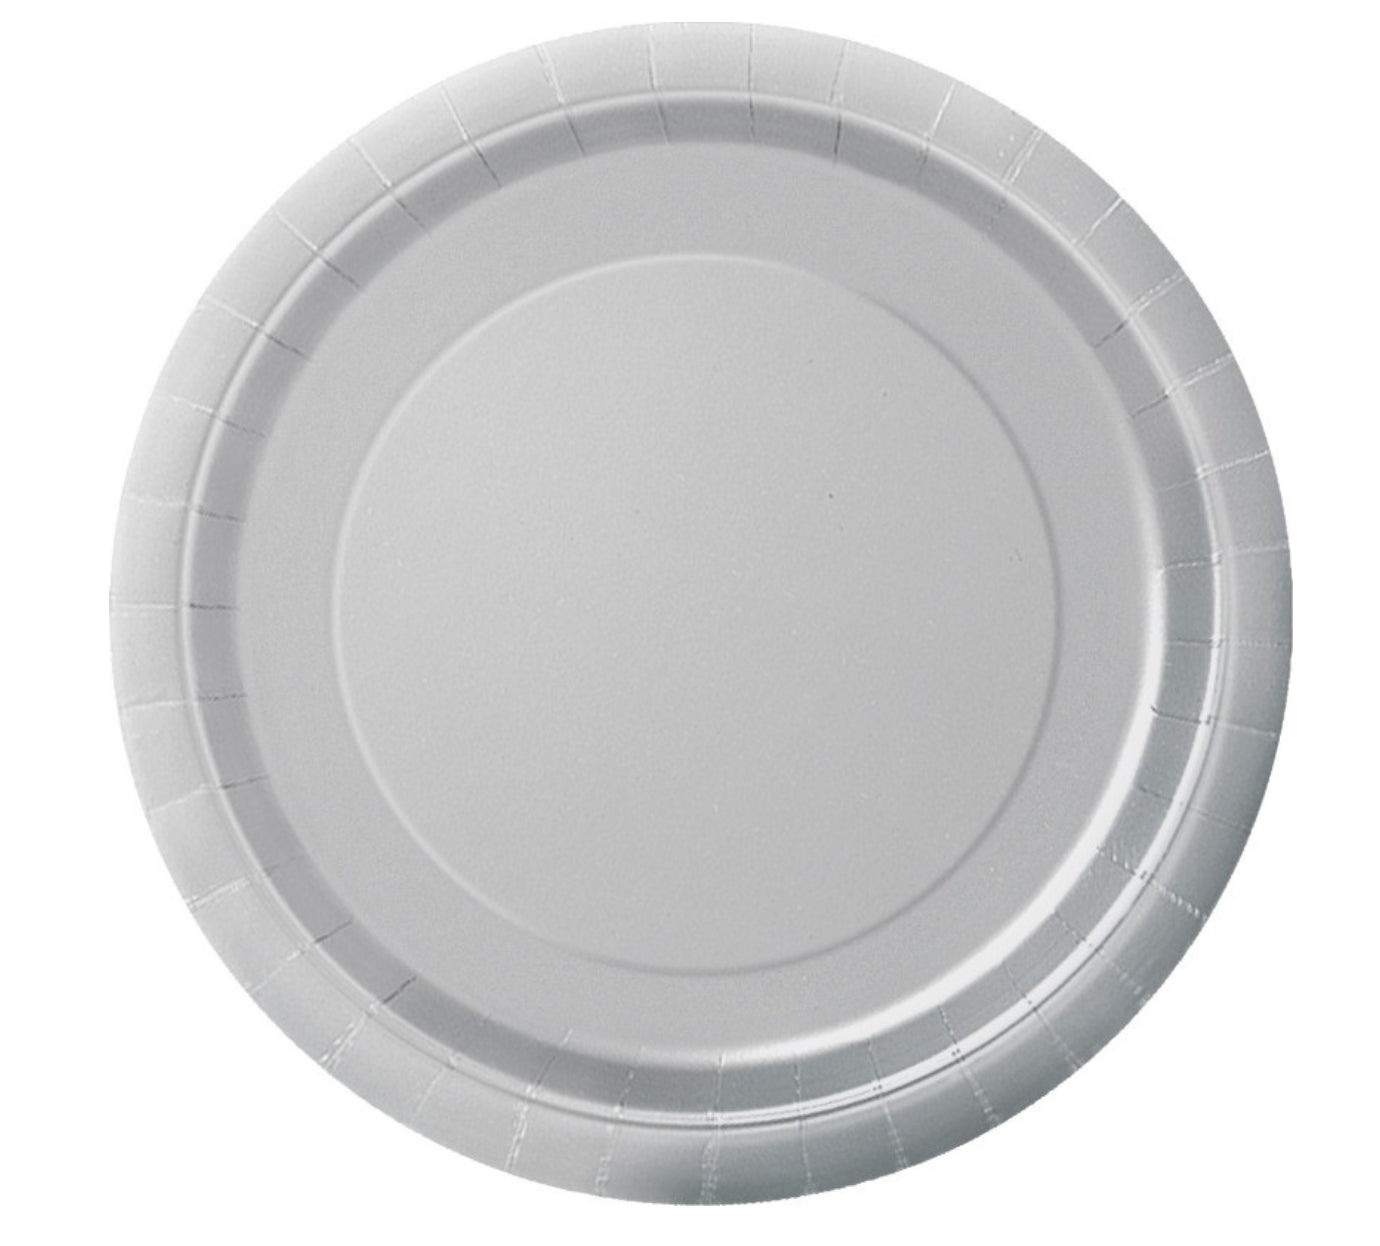 Silver Dinner Plates 8ct